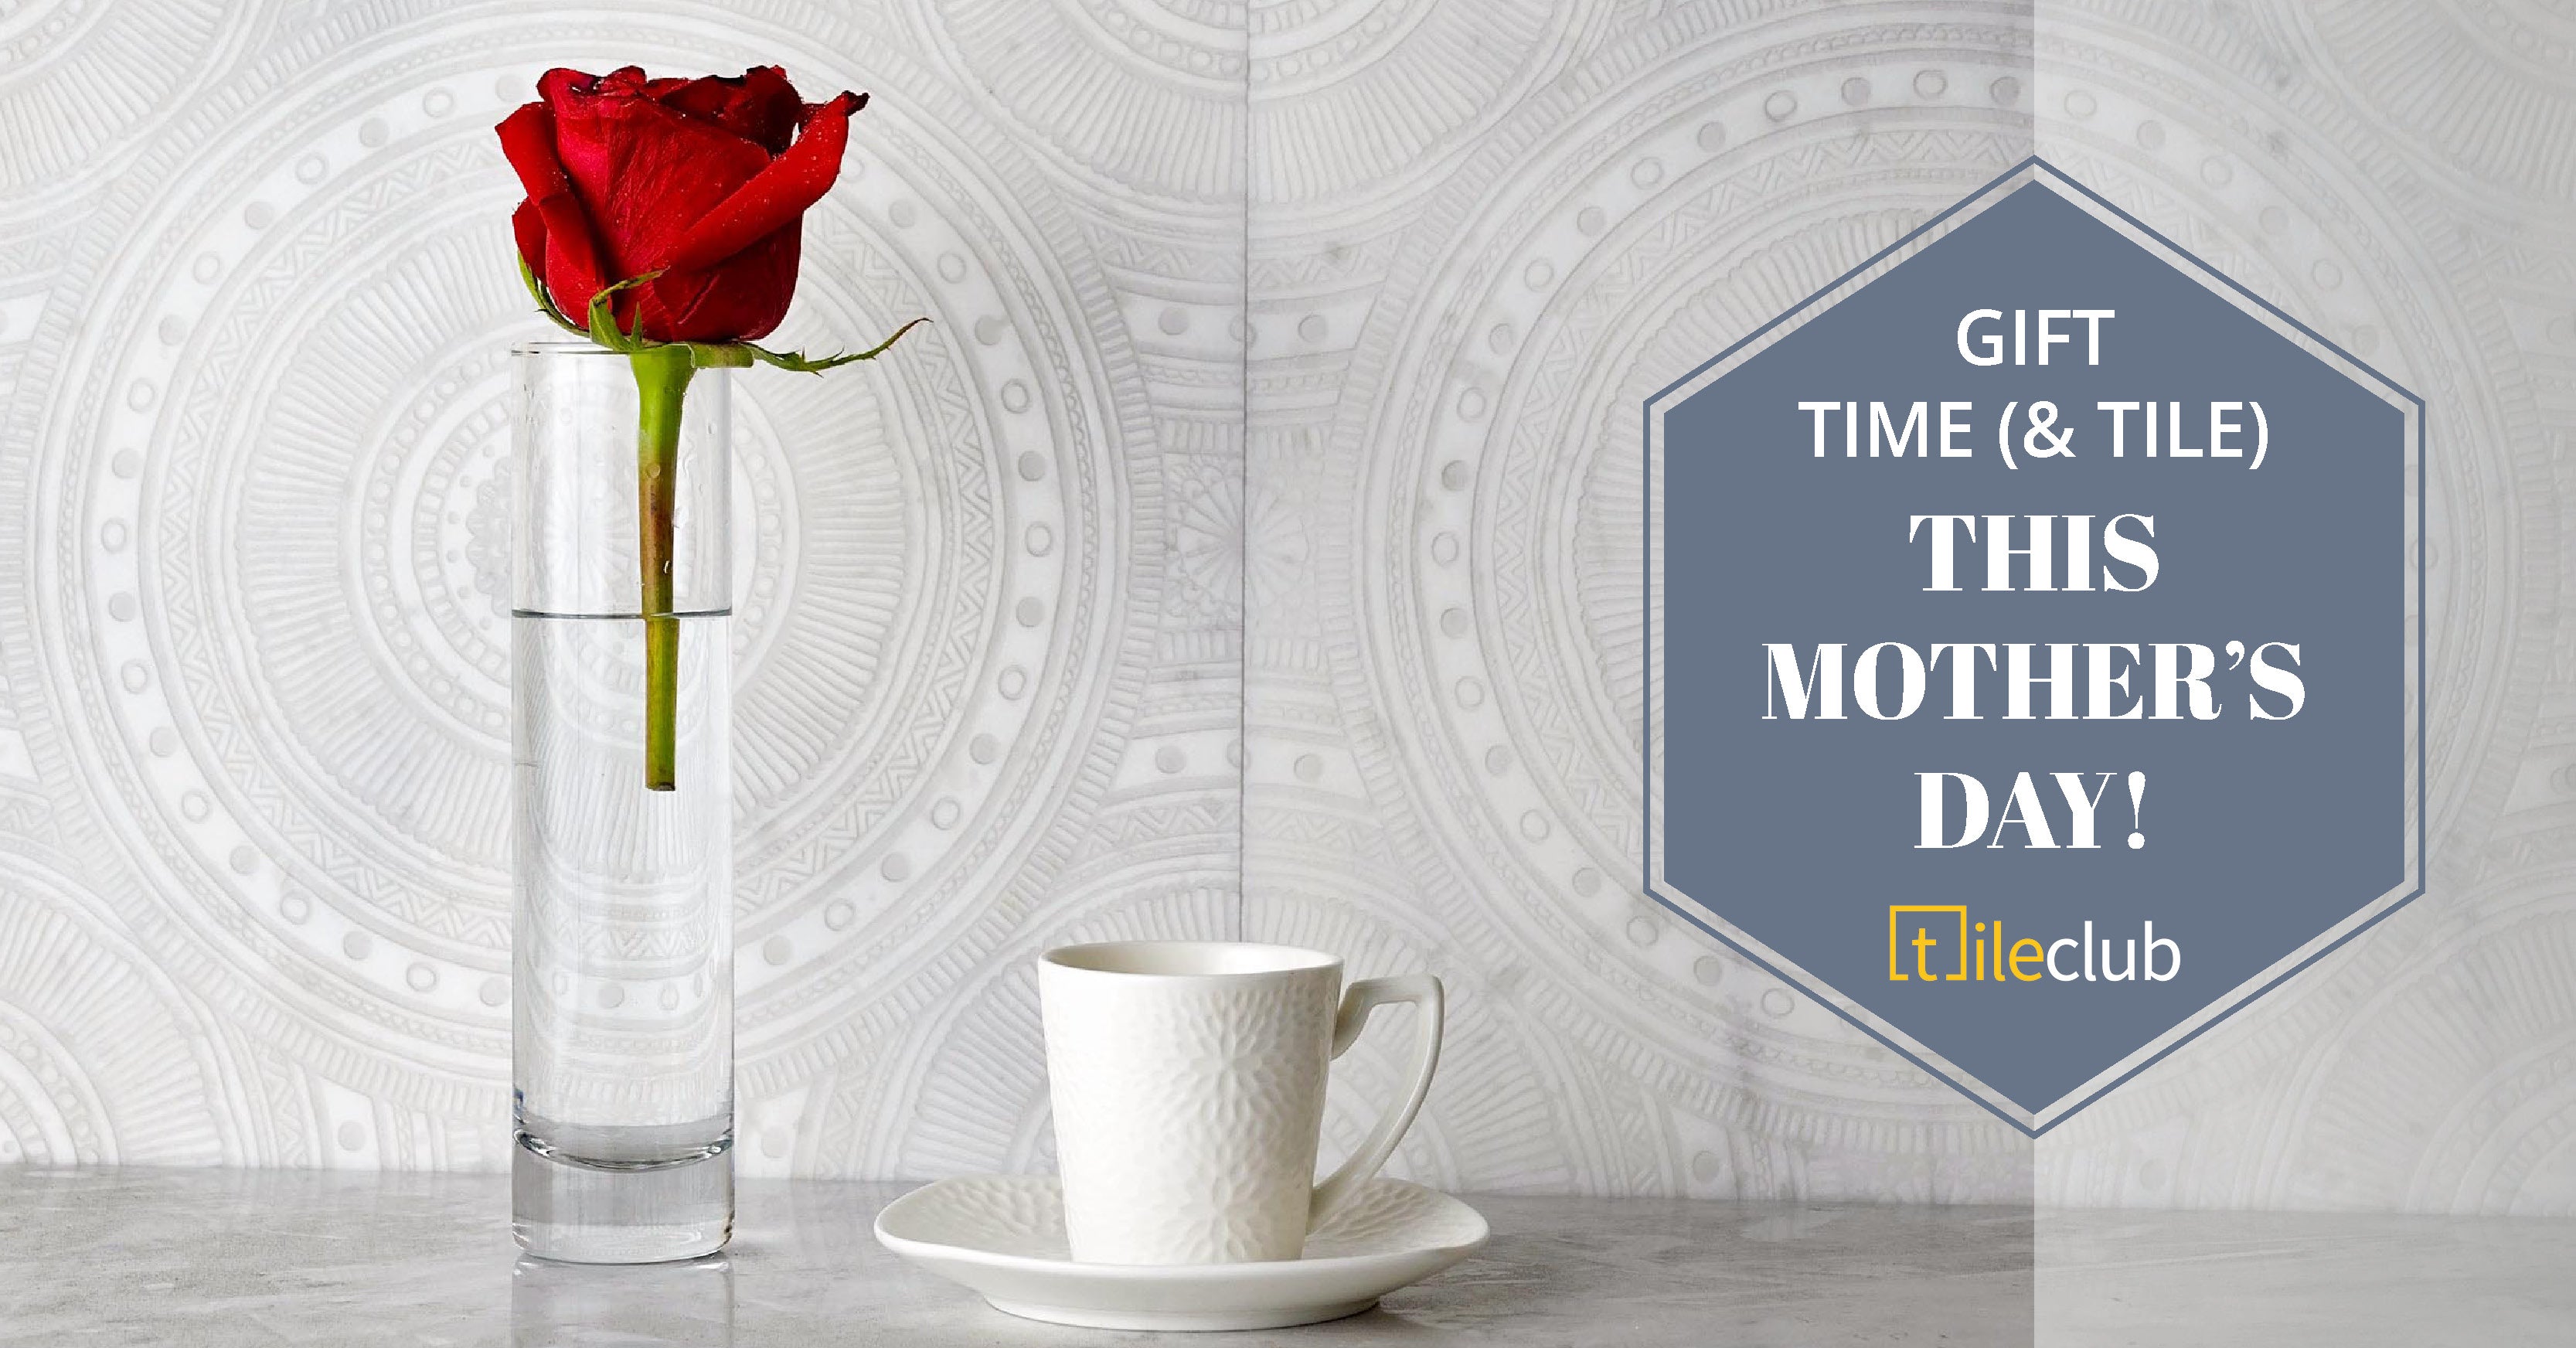 Give Mom the Gift of Time (and Tile) This Mother's Day